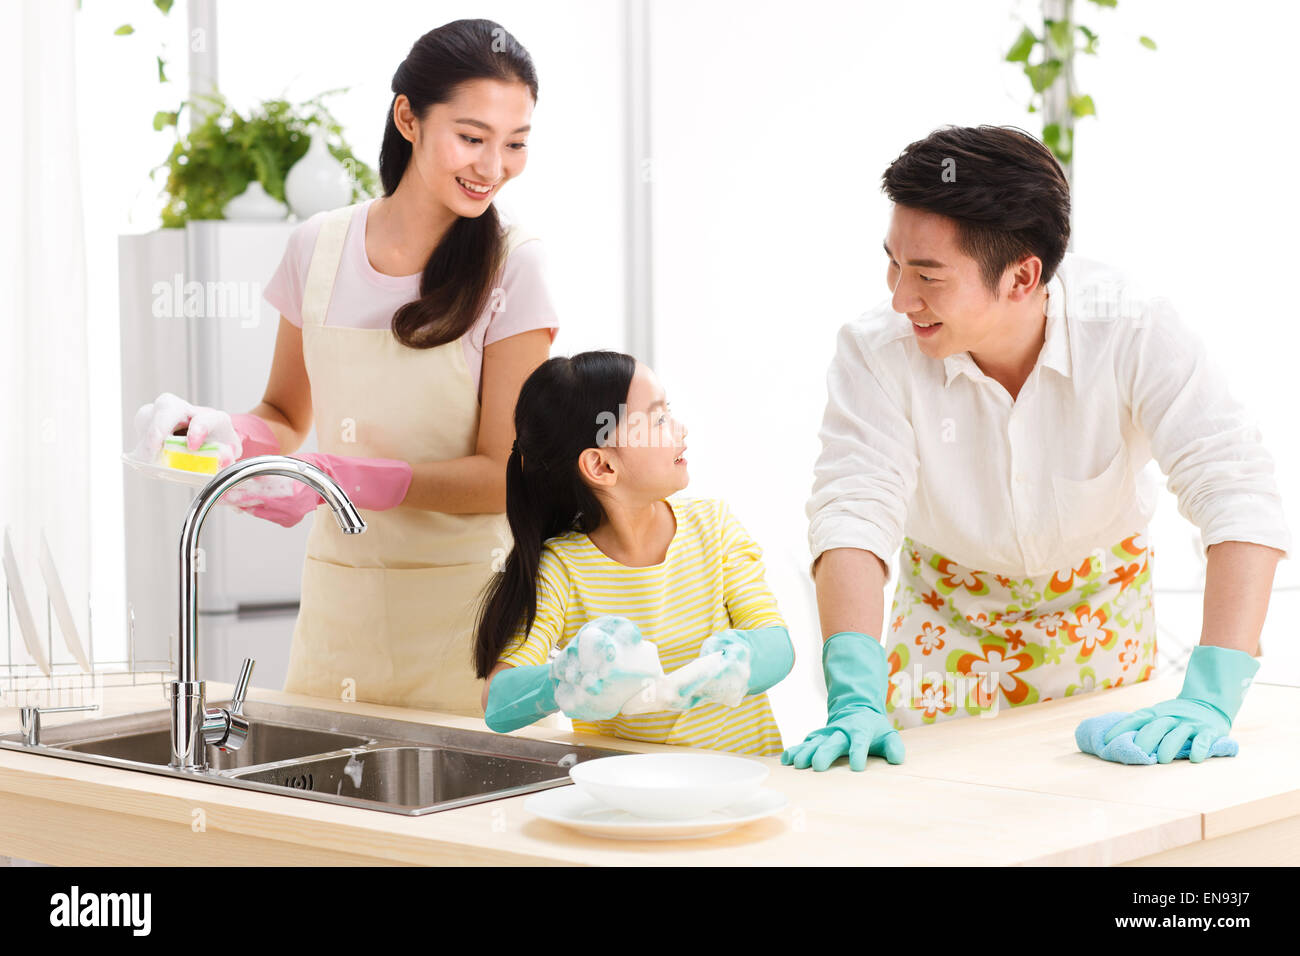 Family doing cleaning-up in kitchen Stock Photo